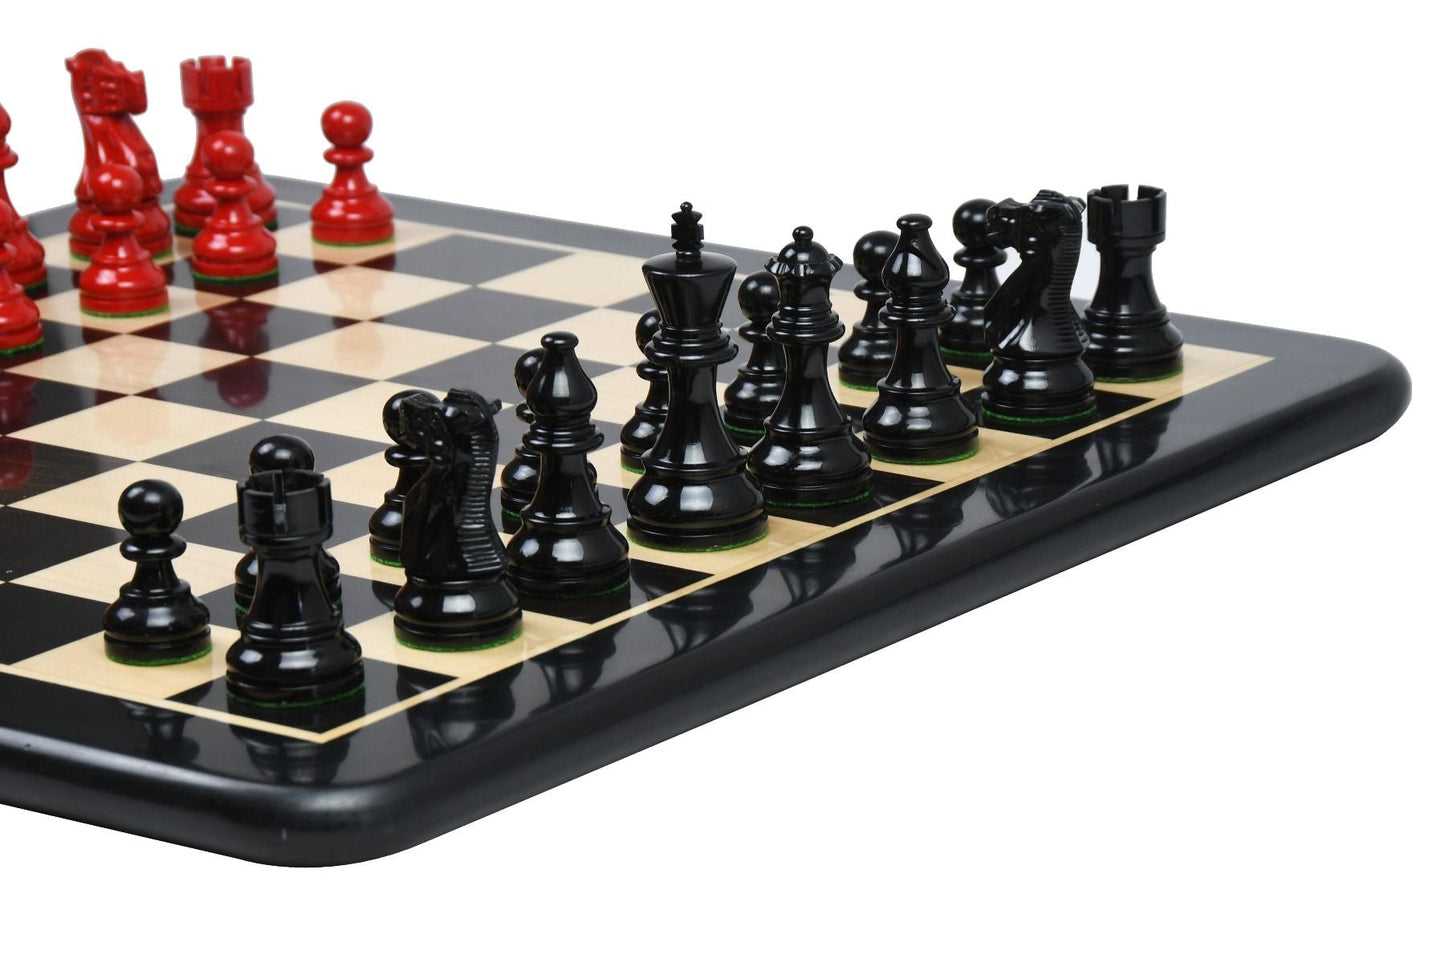 The Smokey Staunton Chess Pieces in Painted Box Wood with Board - 3.8" King